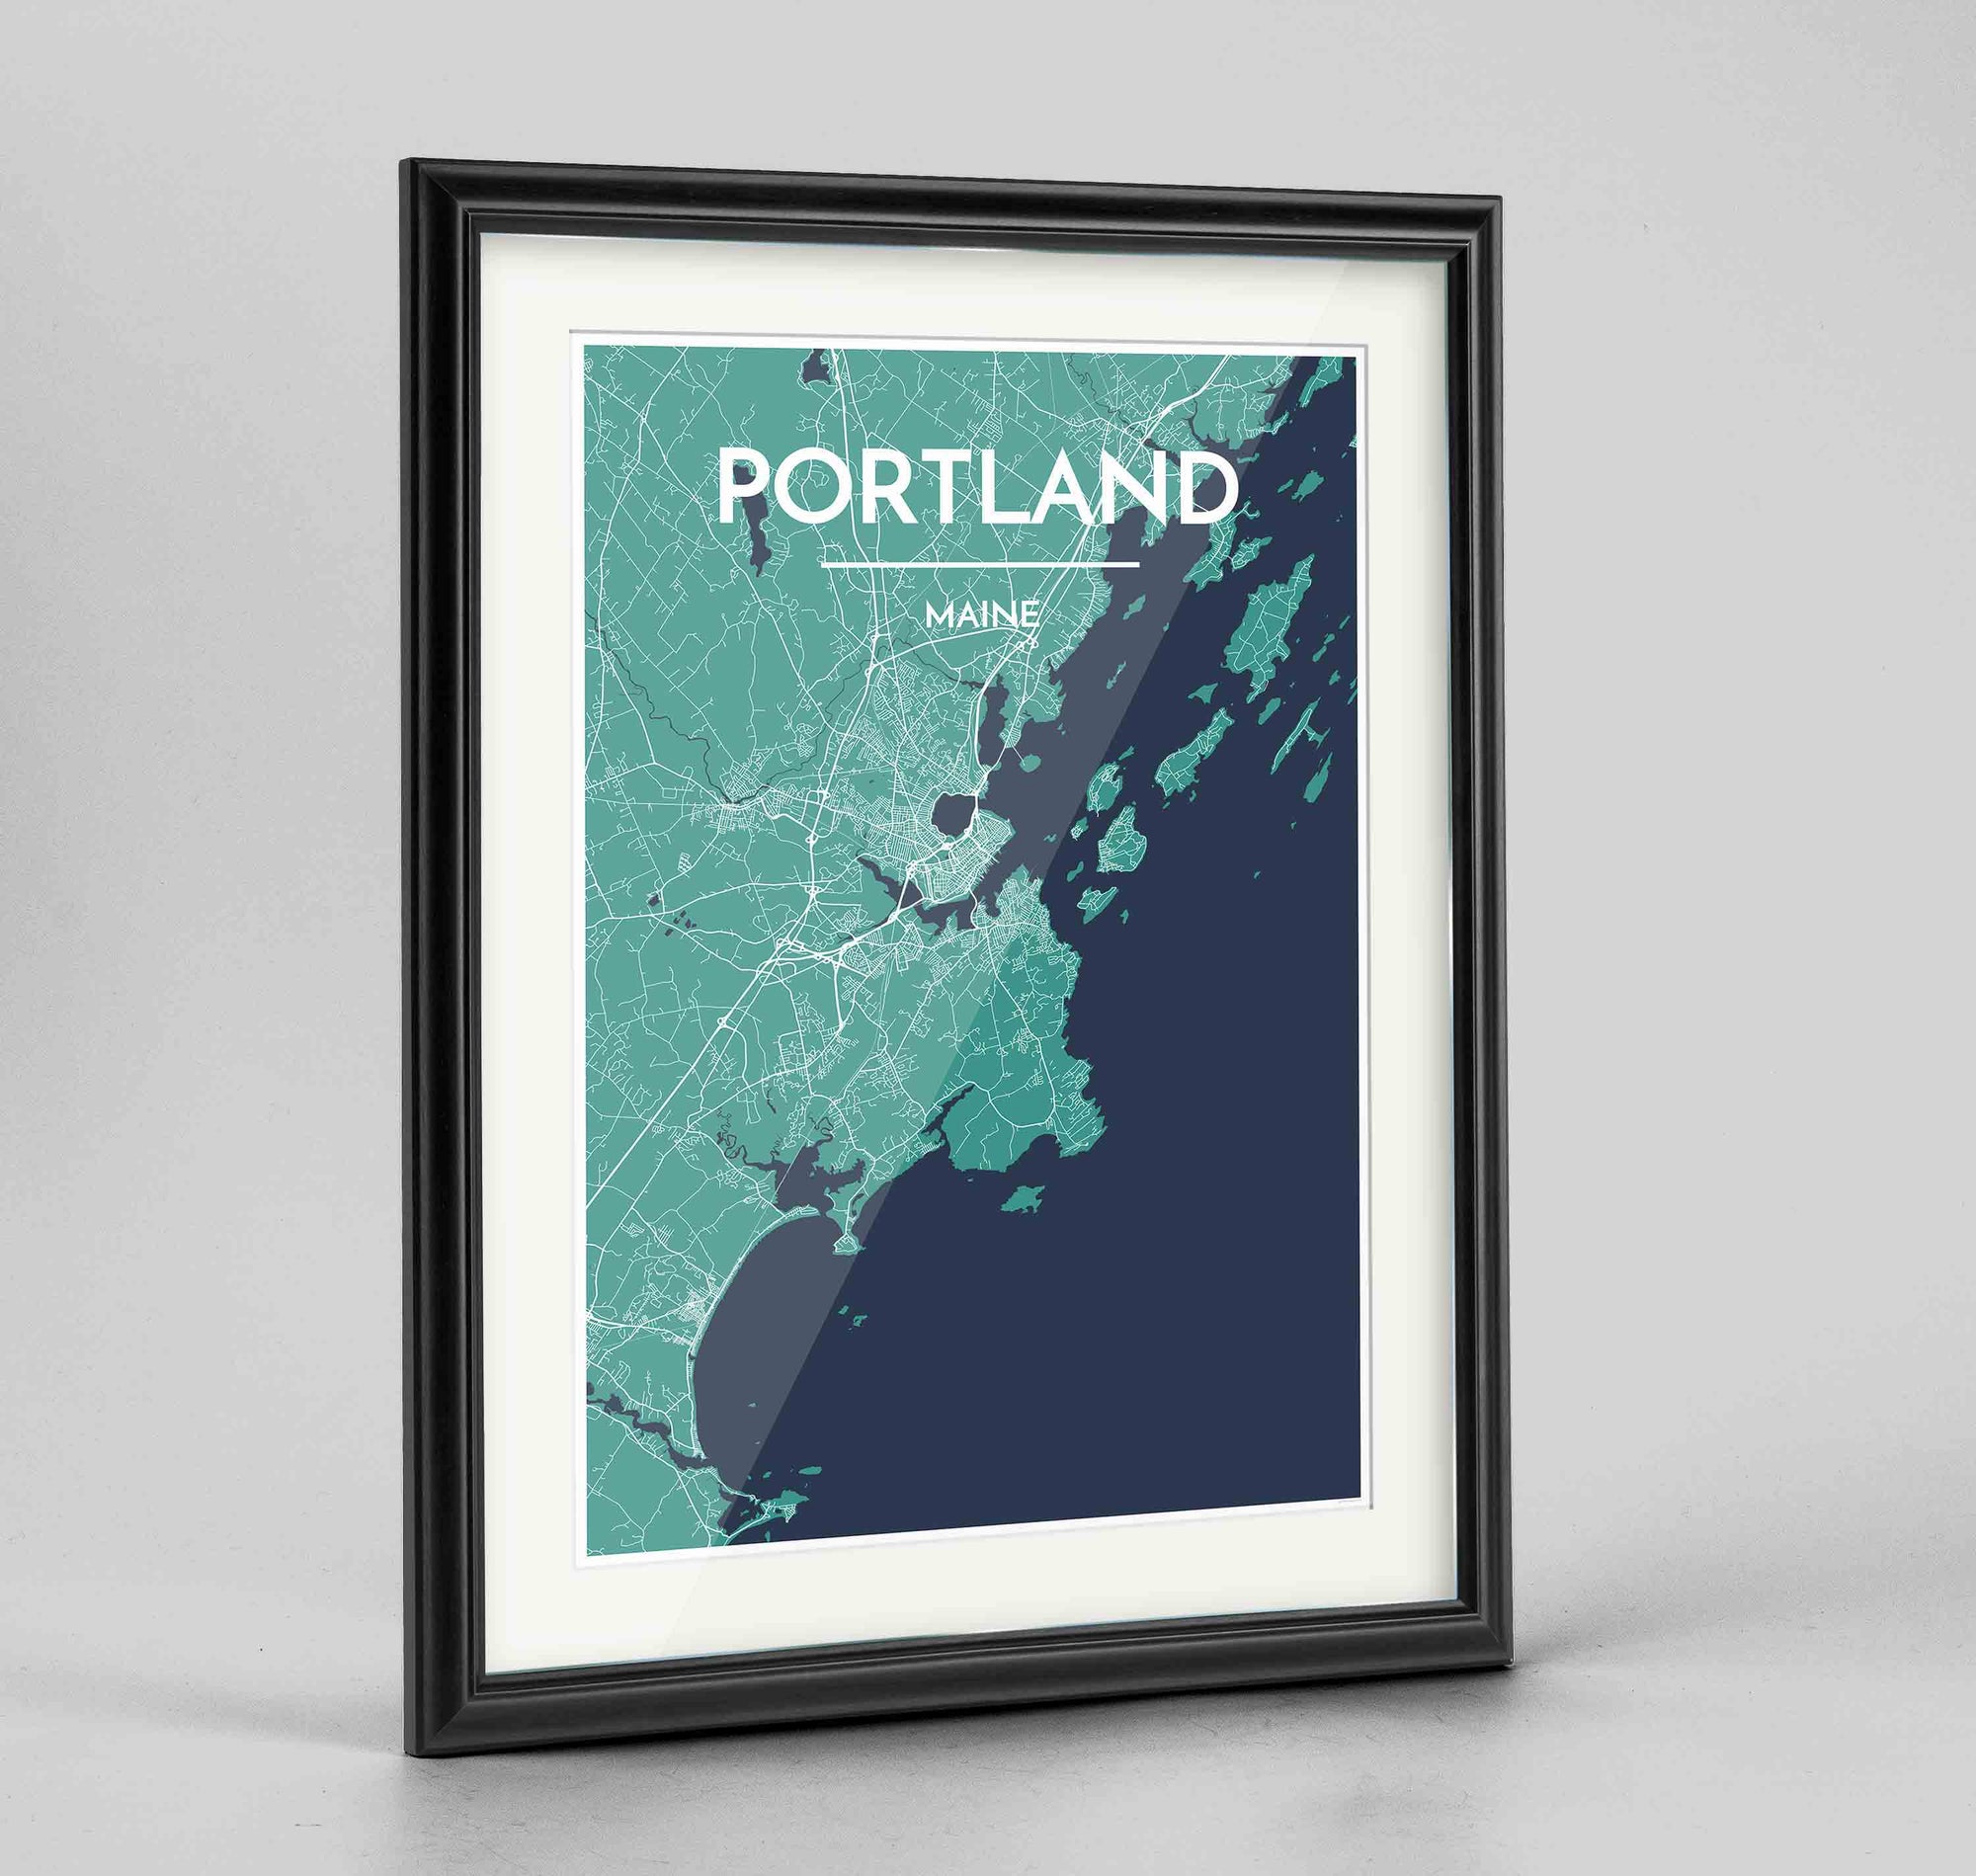 Framed Portland - Maine Map Art Print 24x36" Traditional Black frame Point Two Design Group